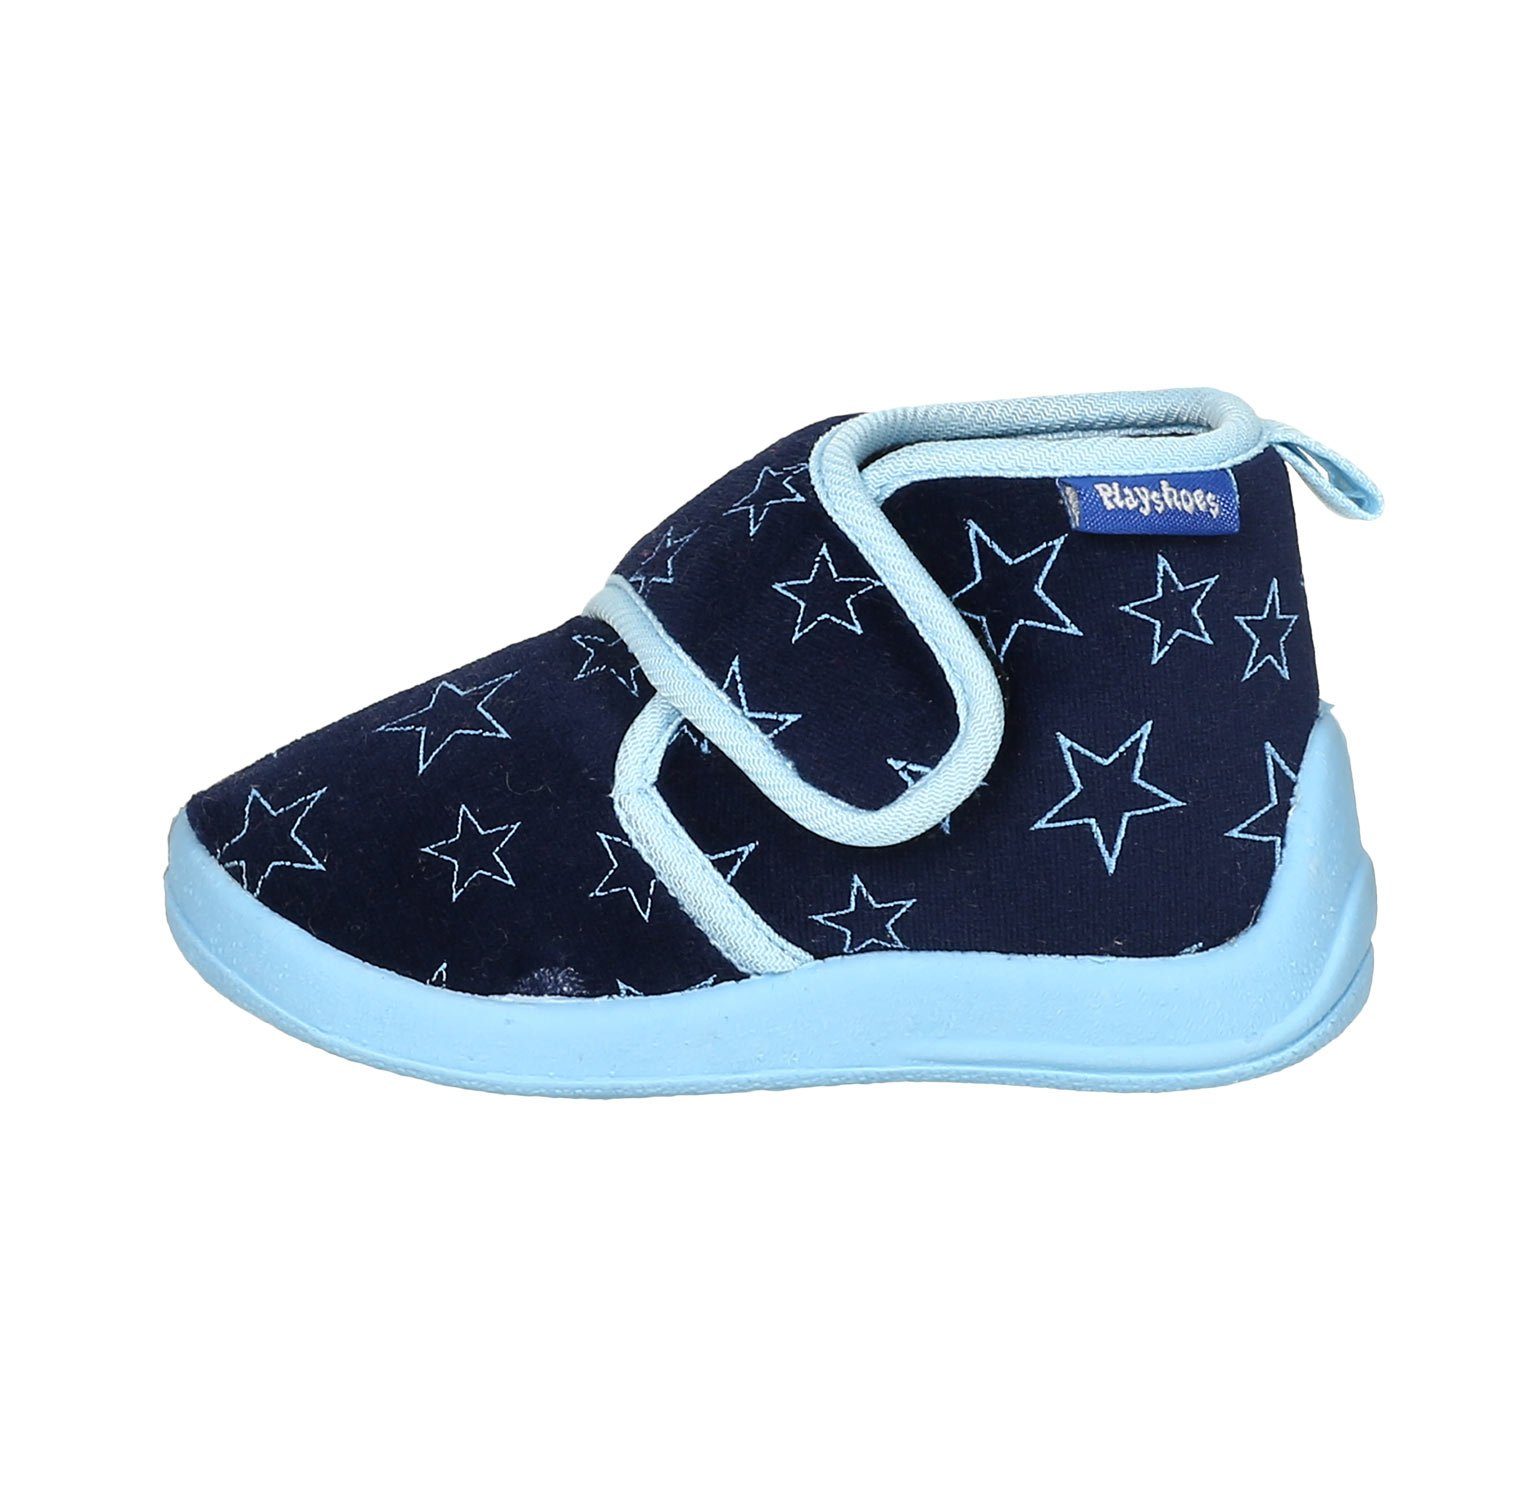 Playshoes Hausschuh Pastell Hausschuh